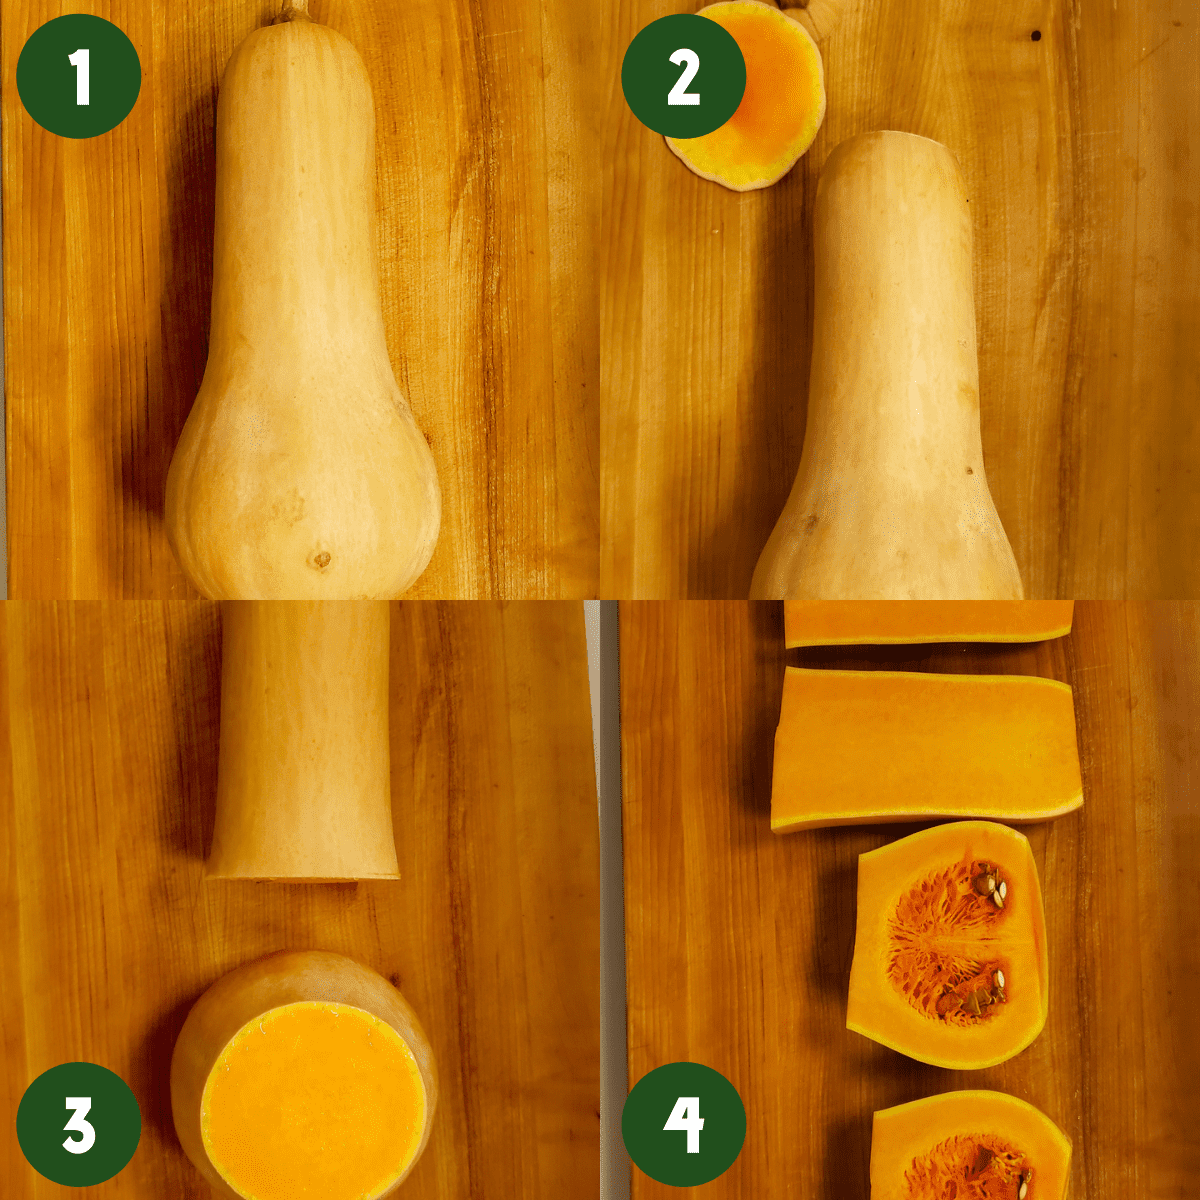 Photo collage 2 by 2 of how to cut a butternut squash. Step 1) Butternut squash whole on a wooden cutting board. Step 2) The top is slice offed the butternut squash on a wooden cutting board. Step 3) The bottom and the top of the butternut squash are separate, on a wooden cutting board. Step 4) 4 Pieces of butternut squash, cut in half showing the inside on a wooden cutting board.